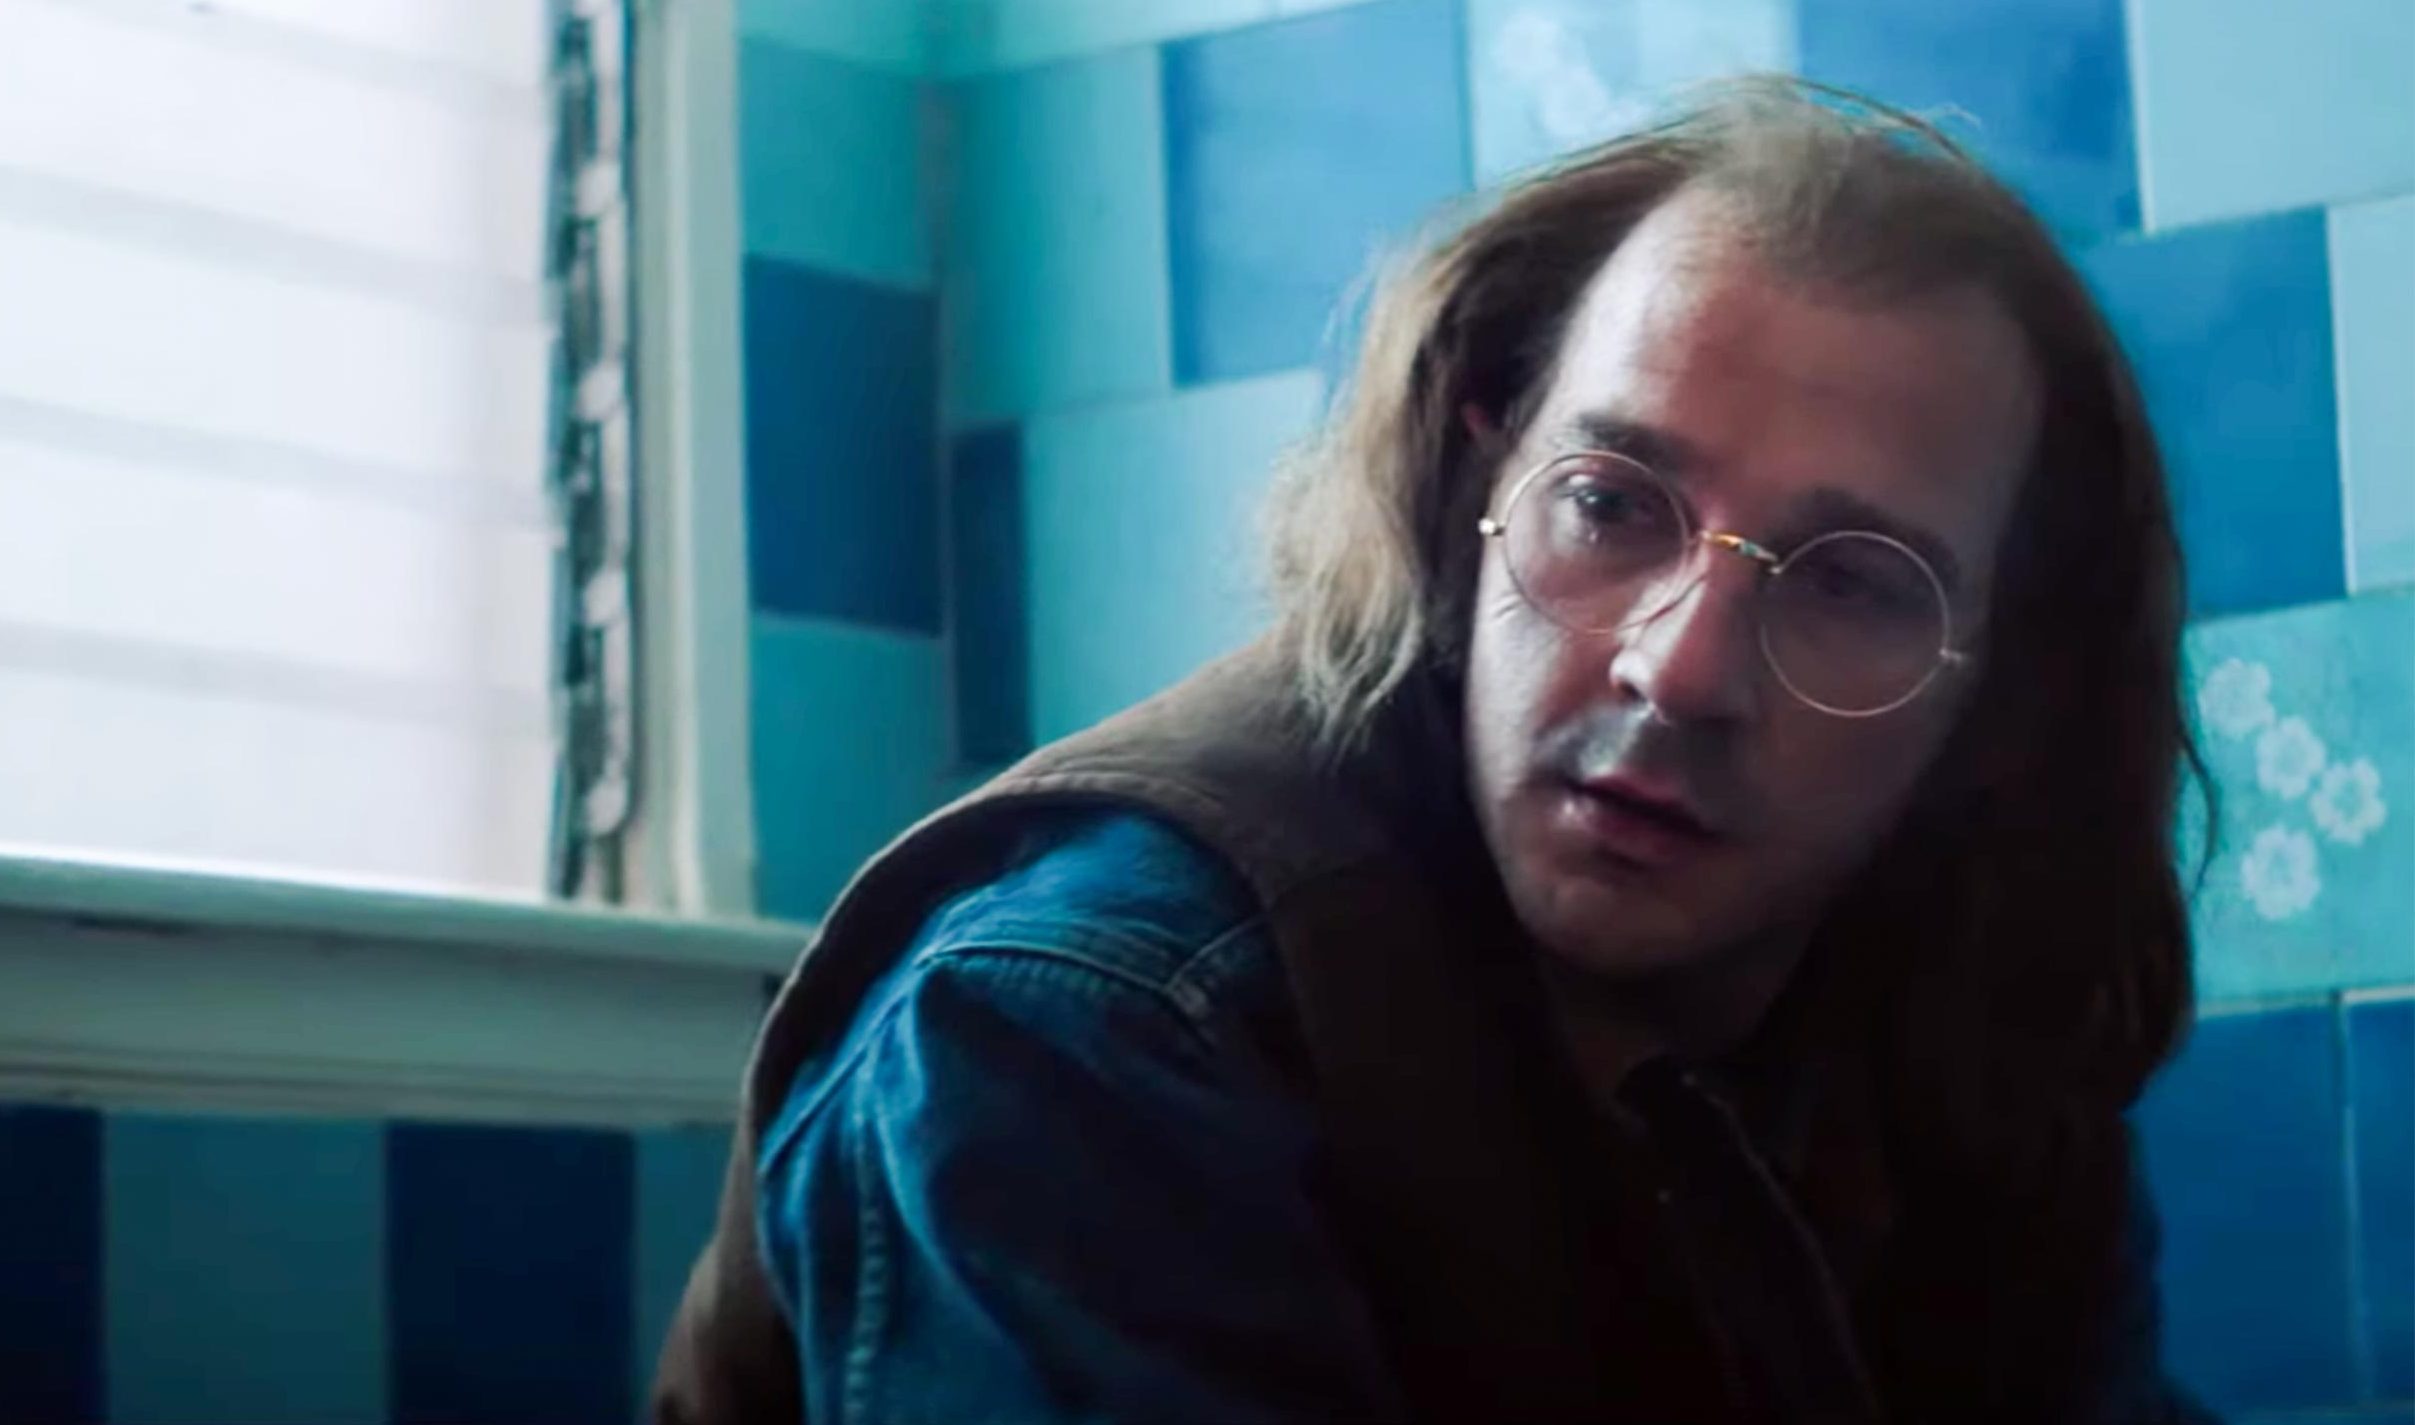 The Honey Boy Trailer Shows Us Shia LaBeouf’s Take On His Own Life